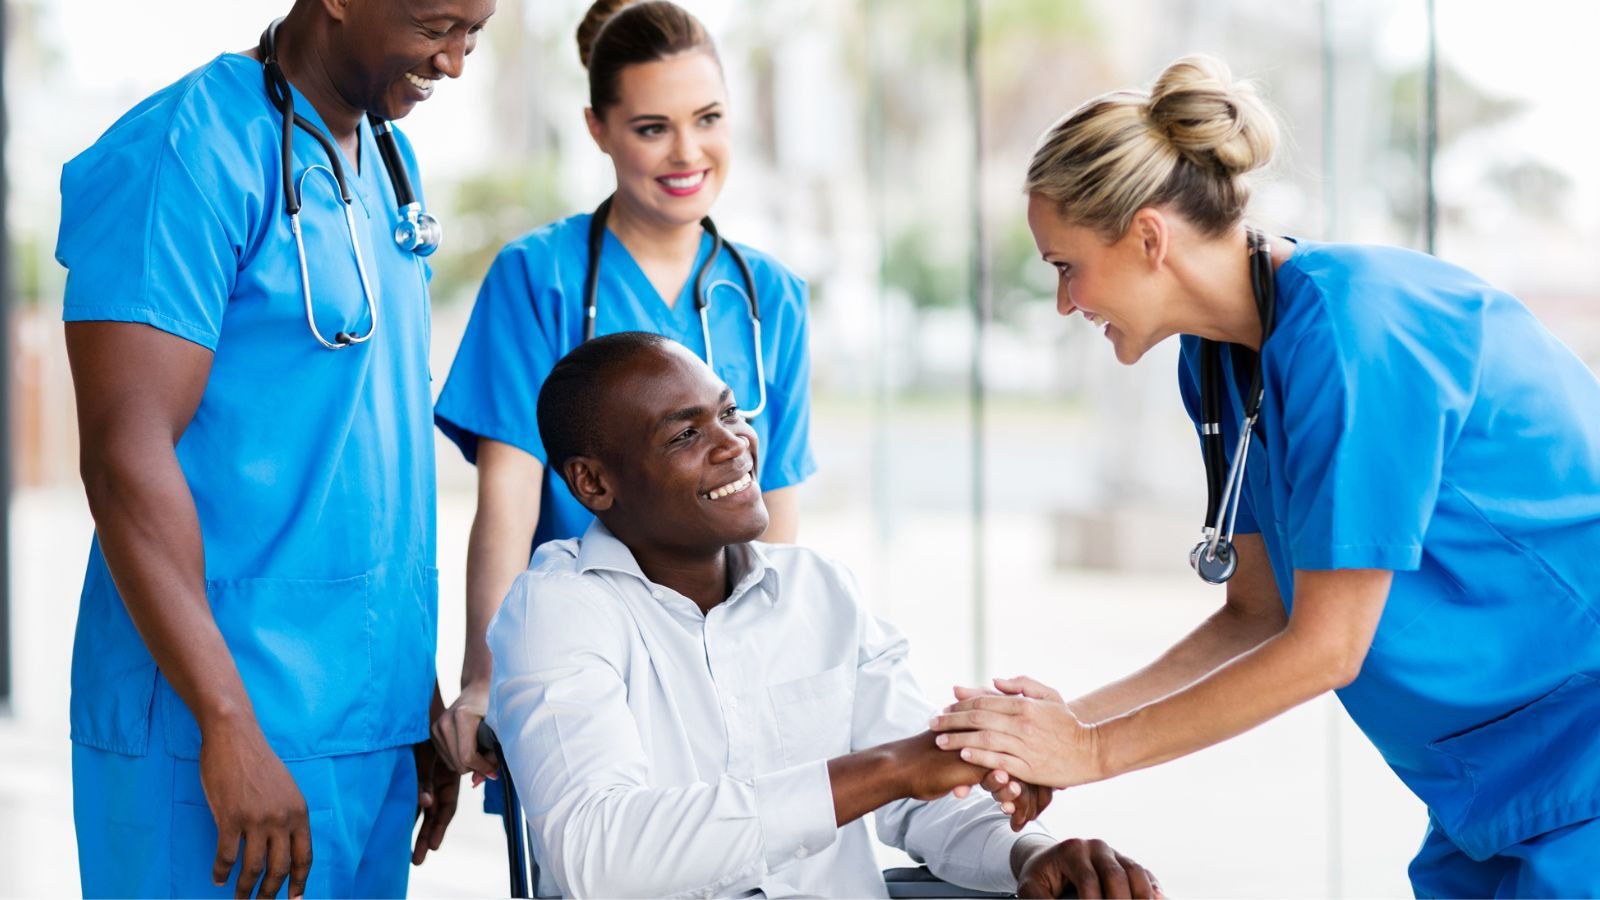 <p>Healthcare workers provide personalized care and comfort to patients. AI cannot match their compassion and dedication. Healthcare workers form meaningful bonds with patients and use discretion depending on the situation that technology is incapable of.</p>